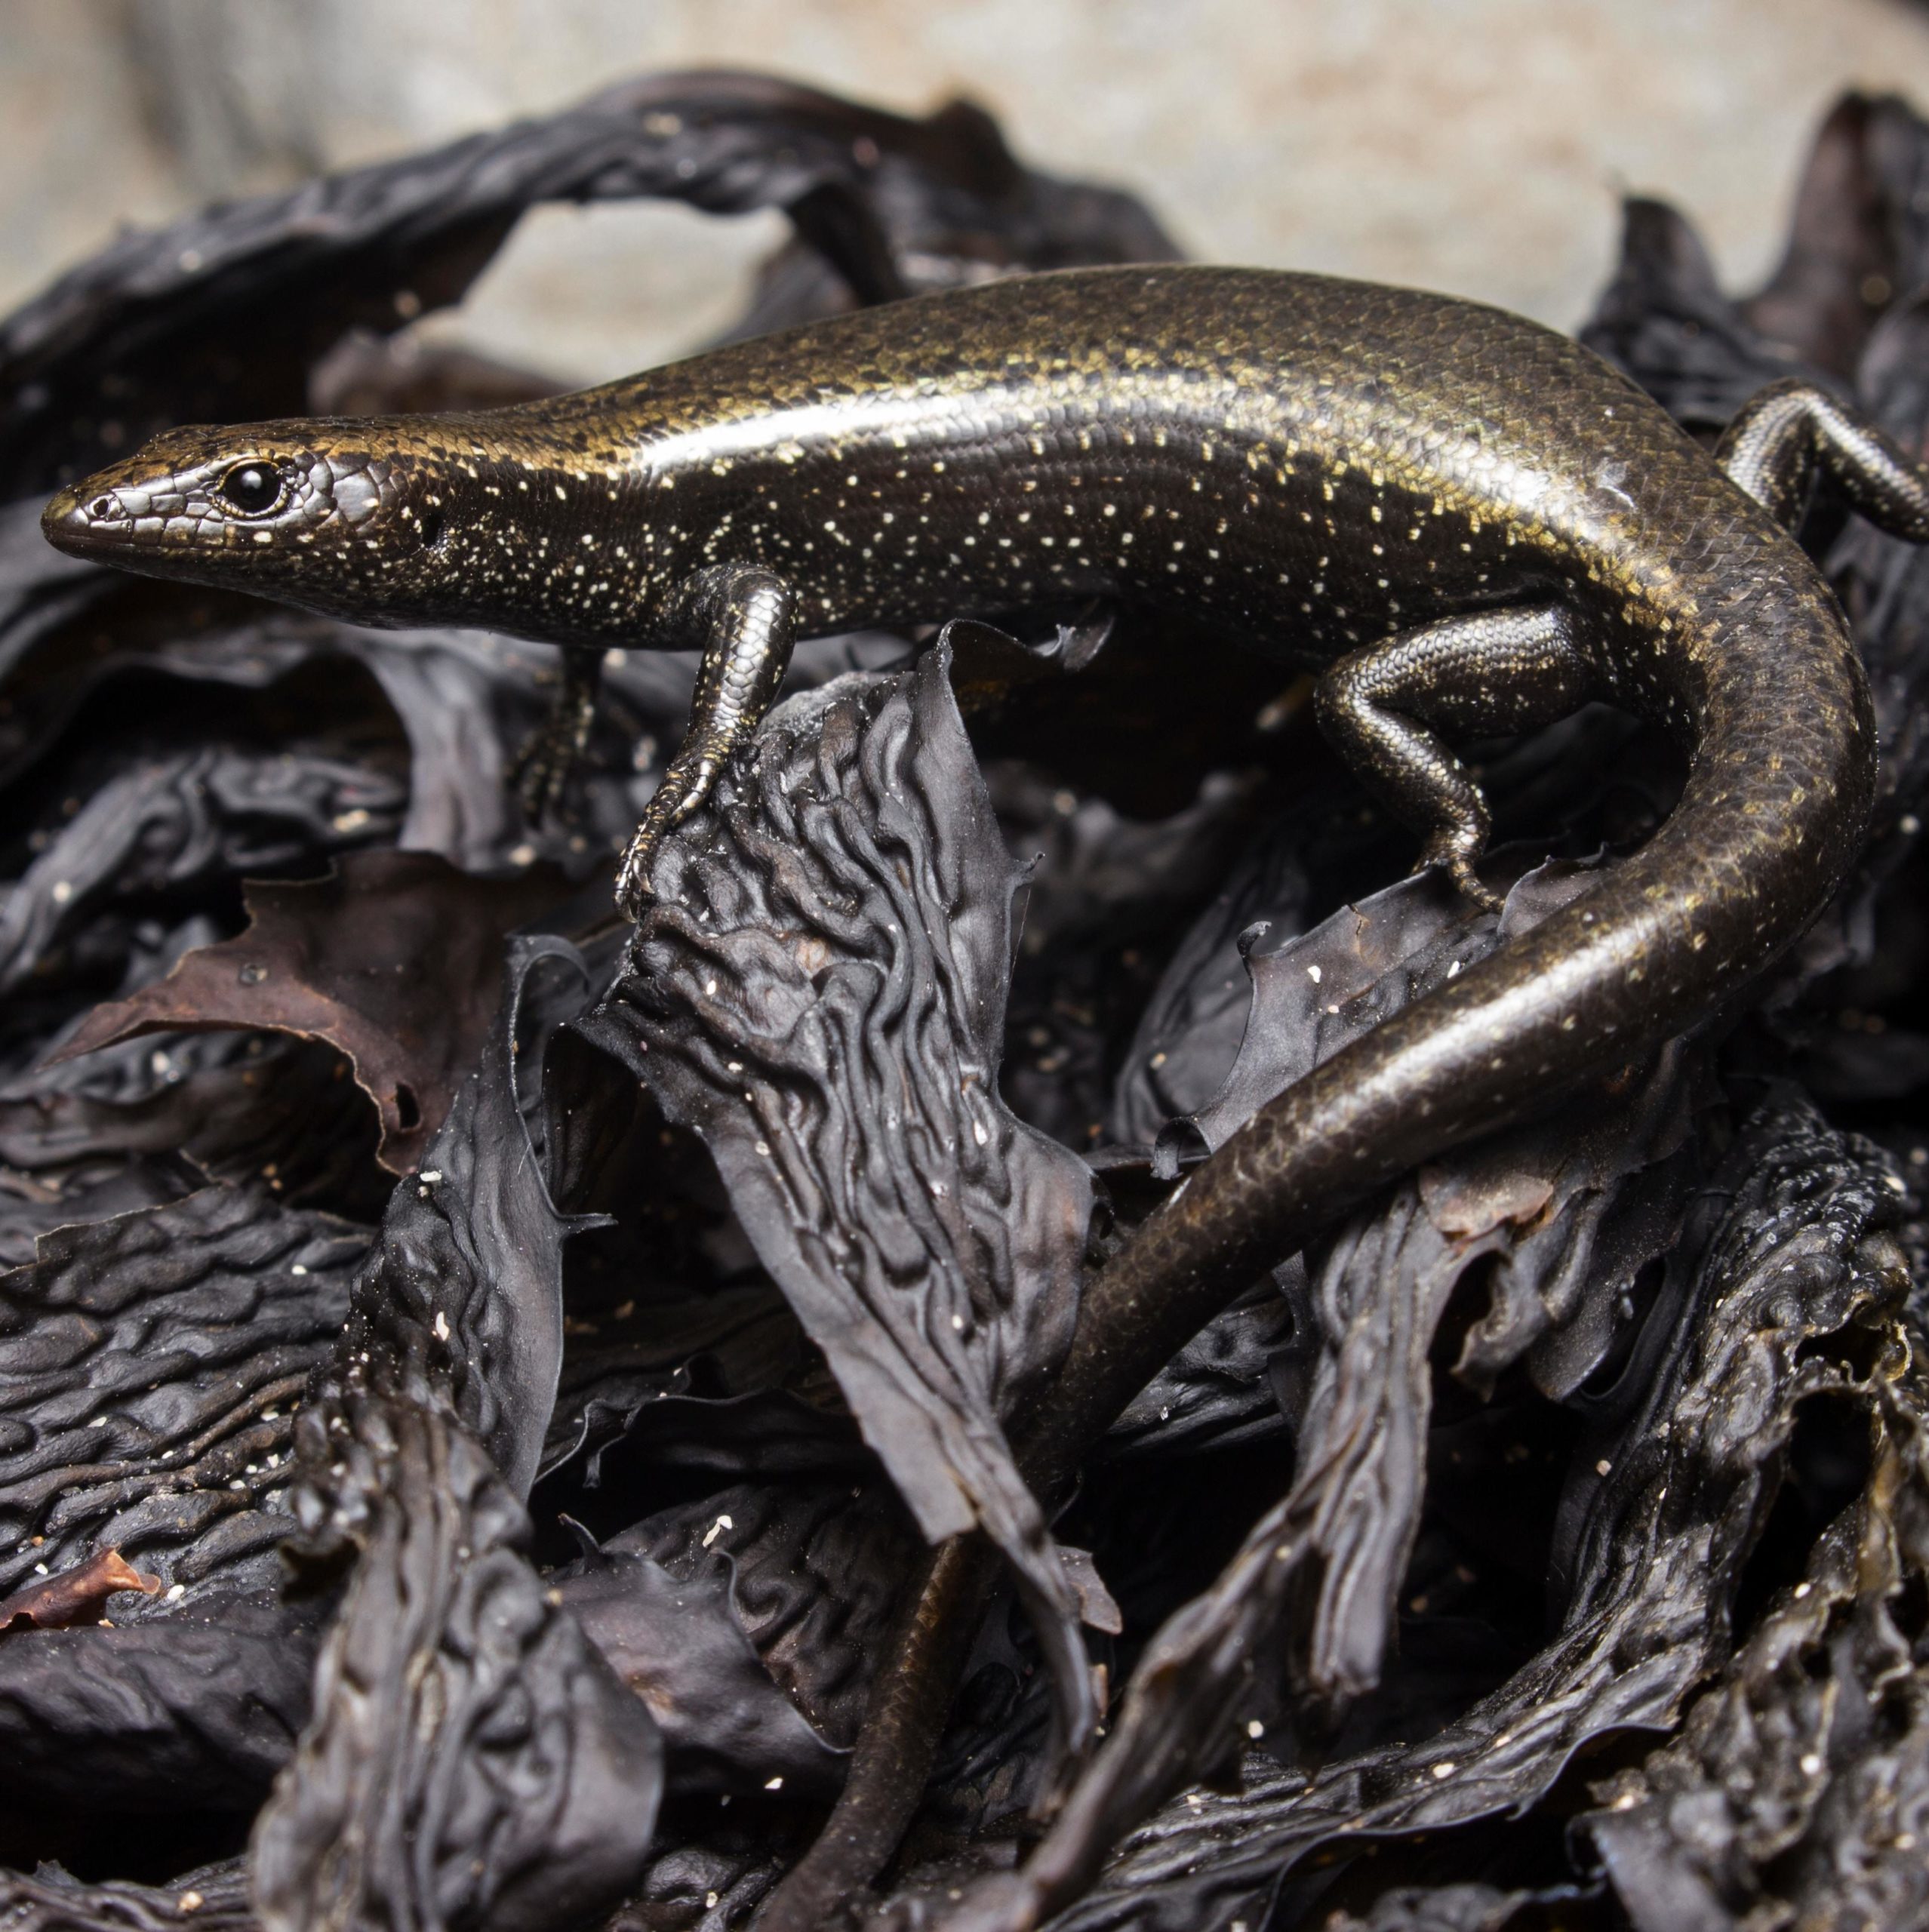 Shore skinks come in many different colours and patterns that are determined by their habitat. This is an image of a boulder beach morph shore skink.